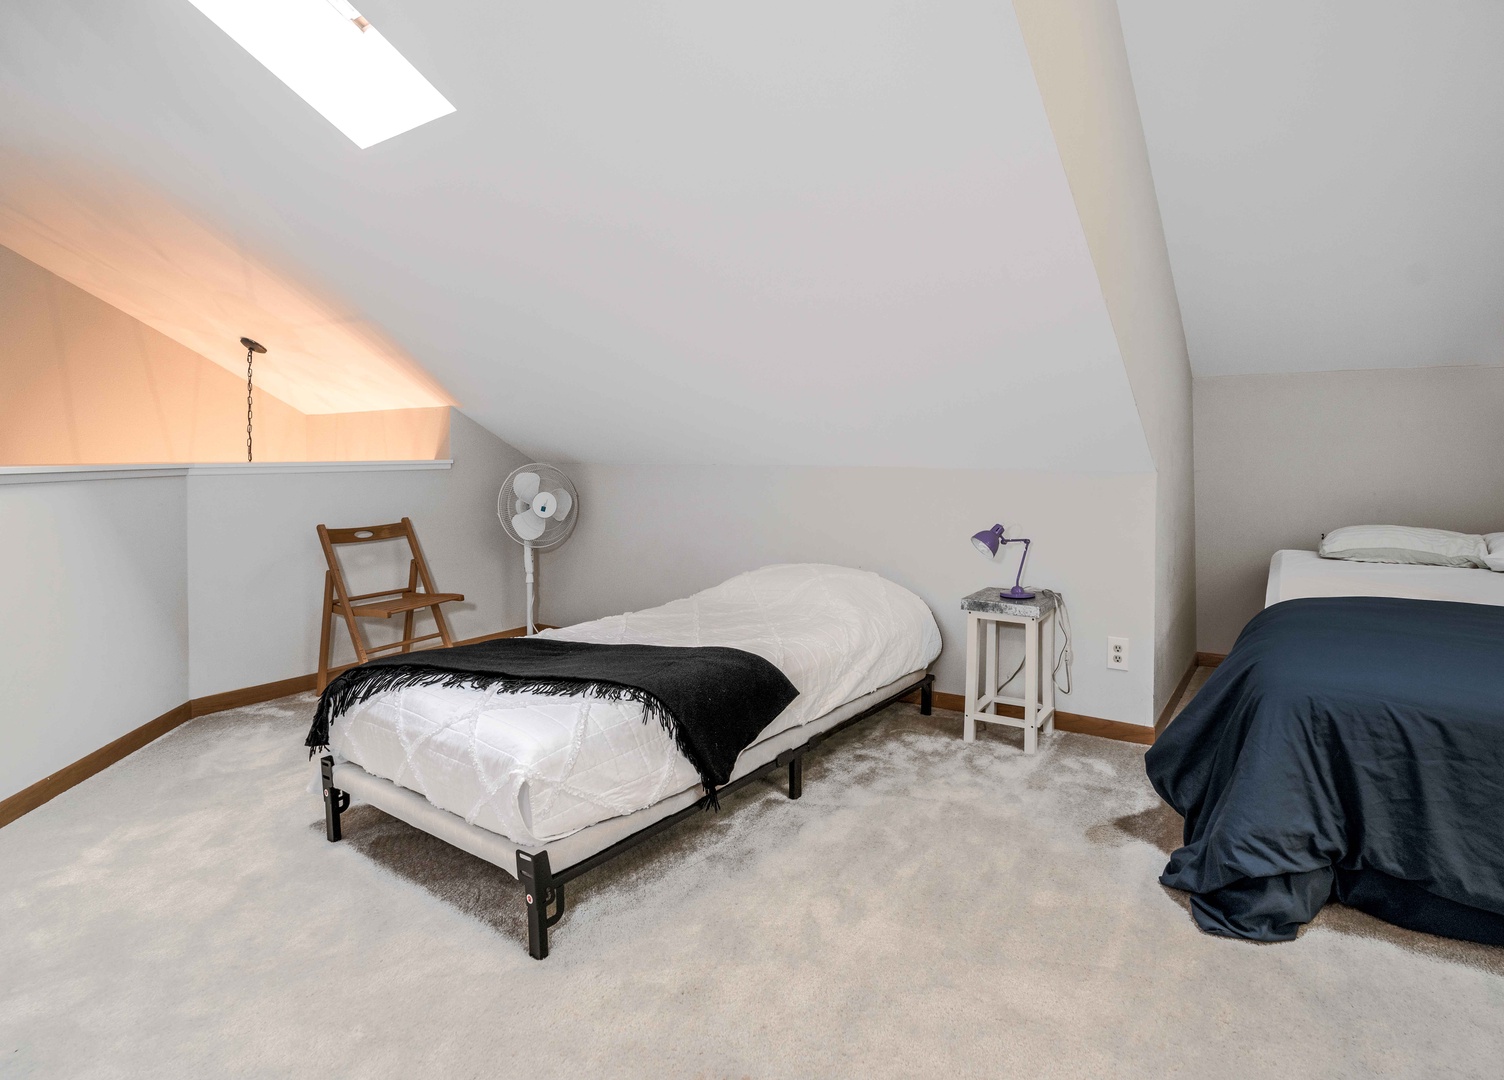 The loft contains a twin bed, queen bed & shared full bathroom